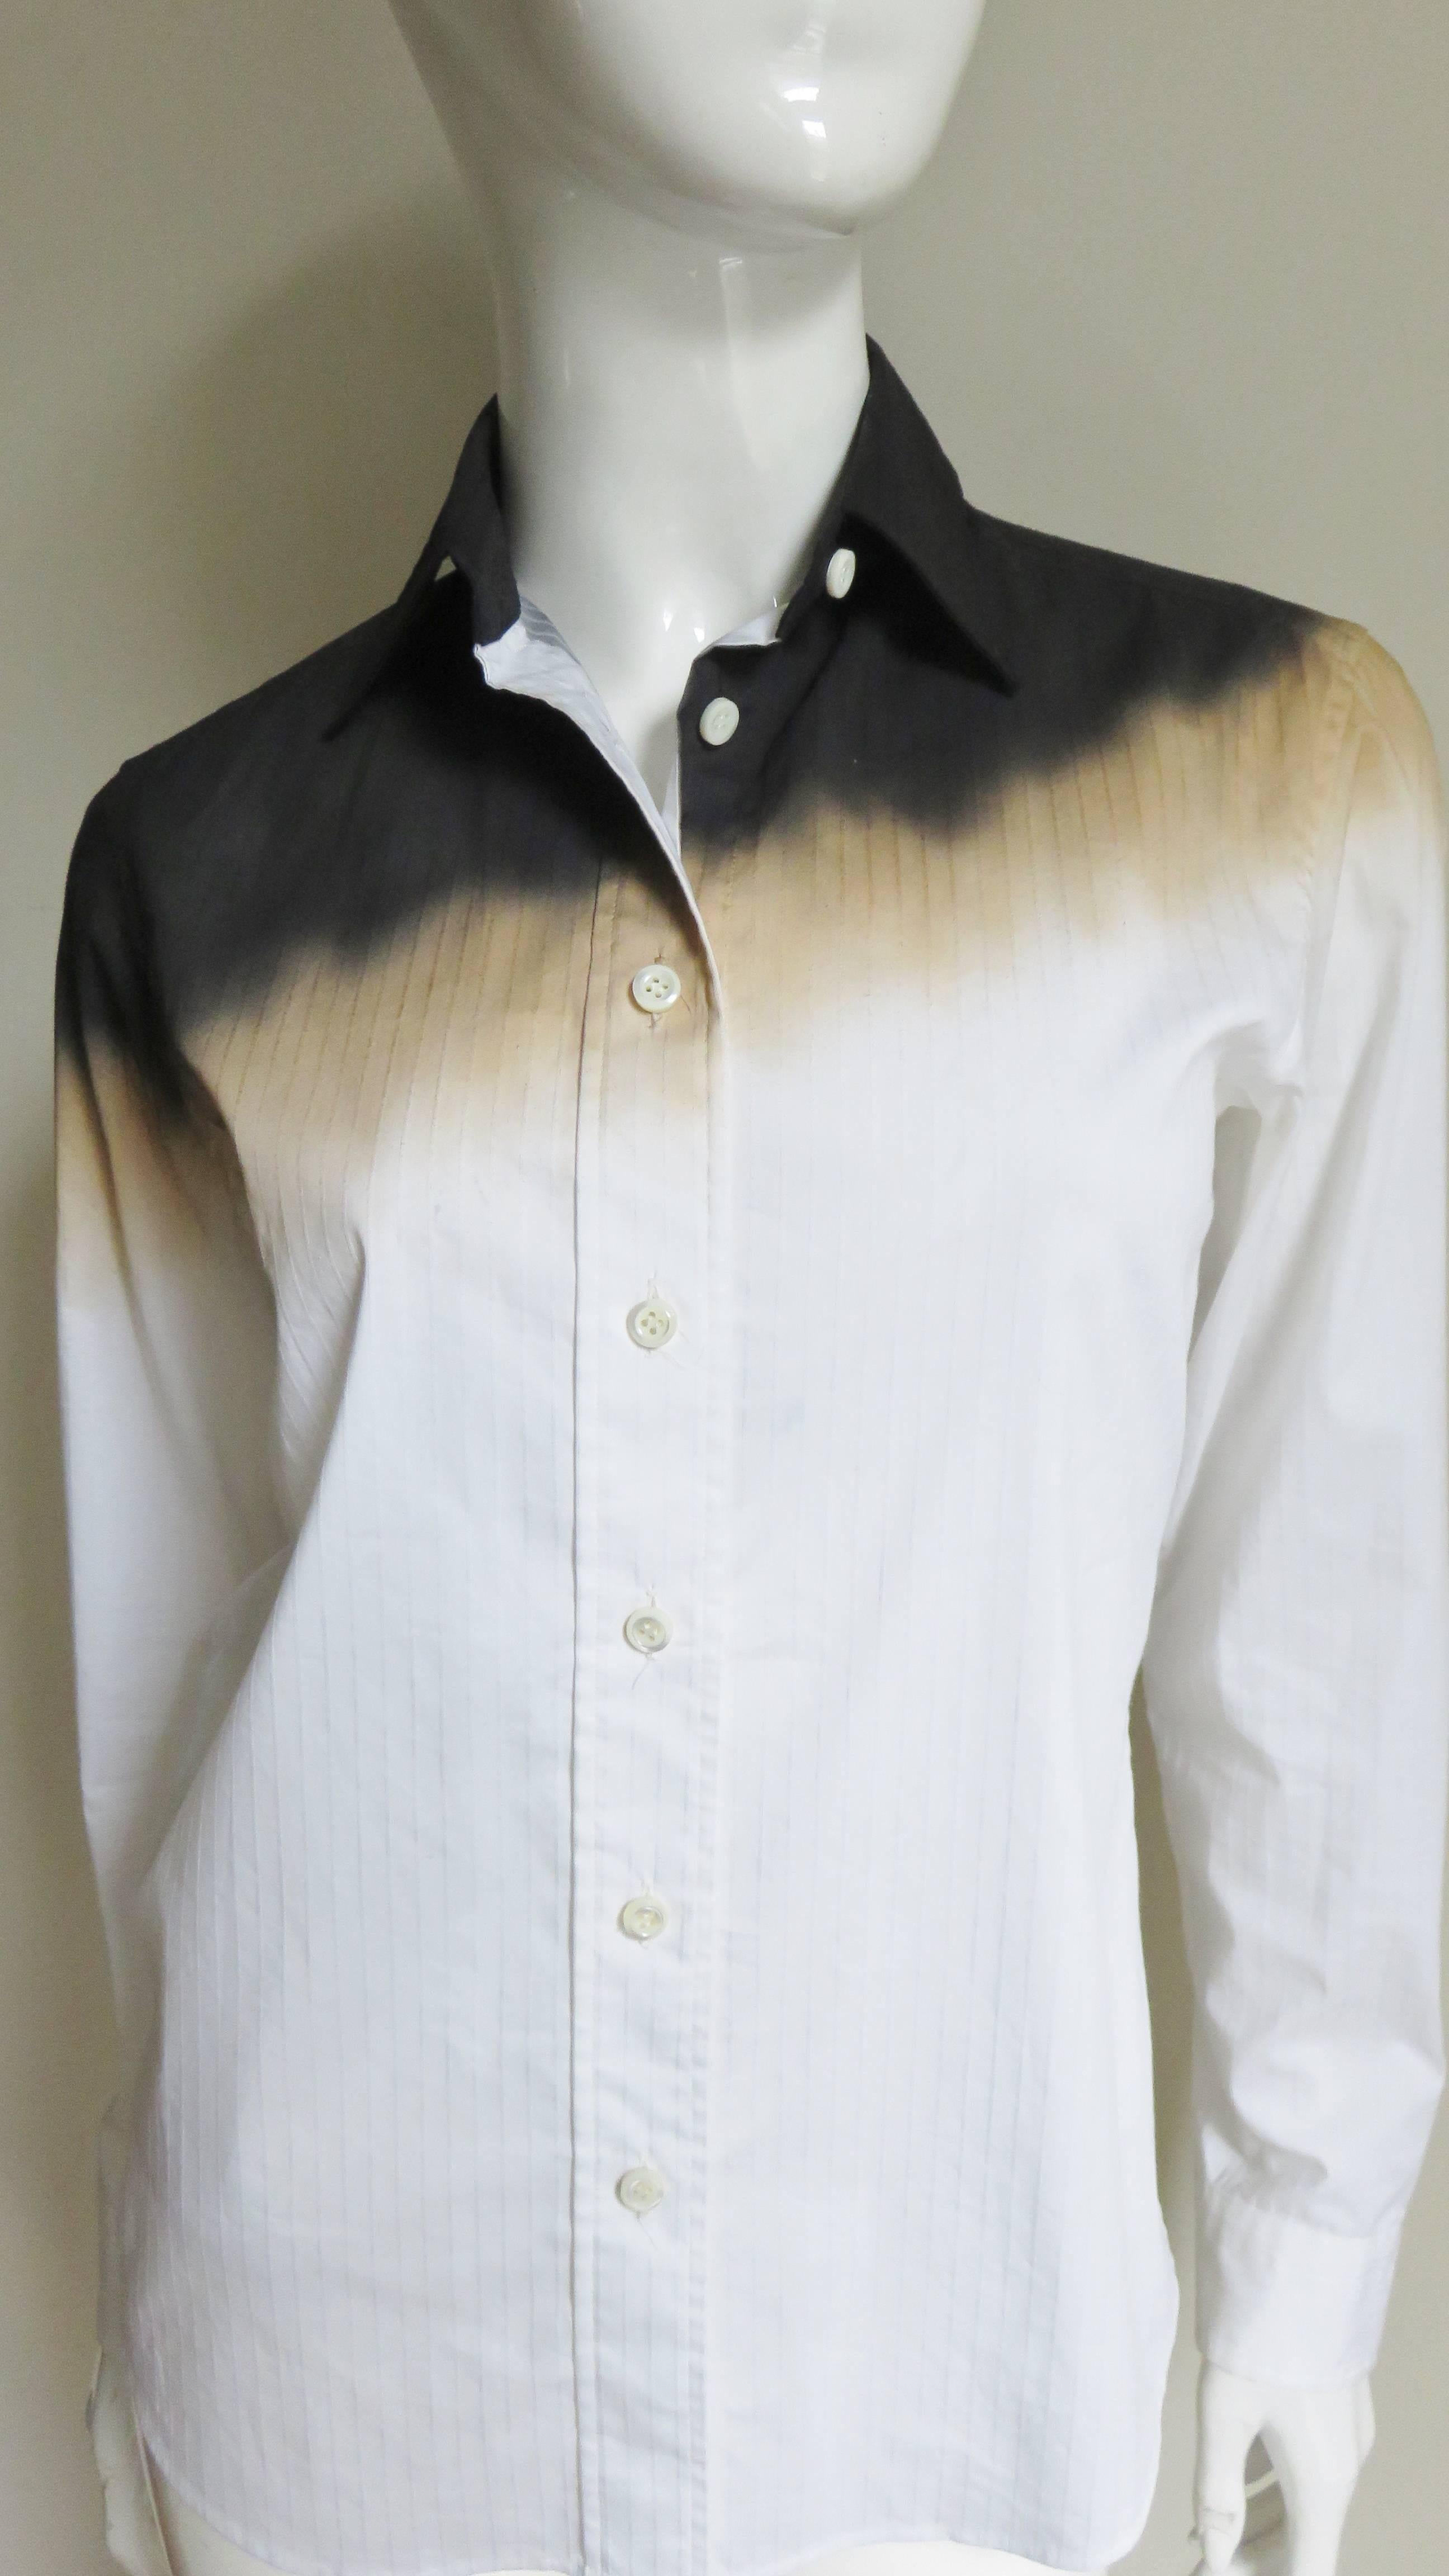 A great off white cotton shirt by Issey Miyake.  It has a diagonal ombre pattern across the shoulders blending from black to gold.  The shirt has long sleeves, mother of pearl  button cuffs and front plus a shirt tail hem.
Fits sizes Small,